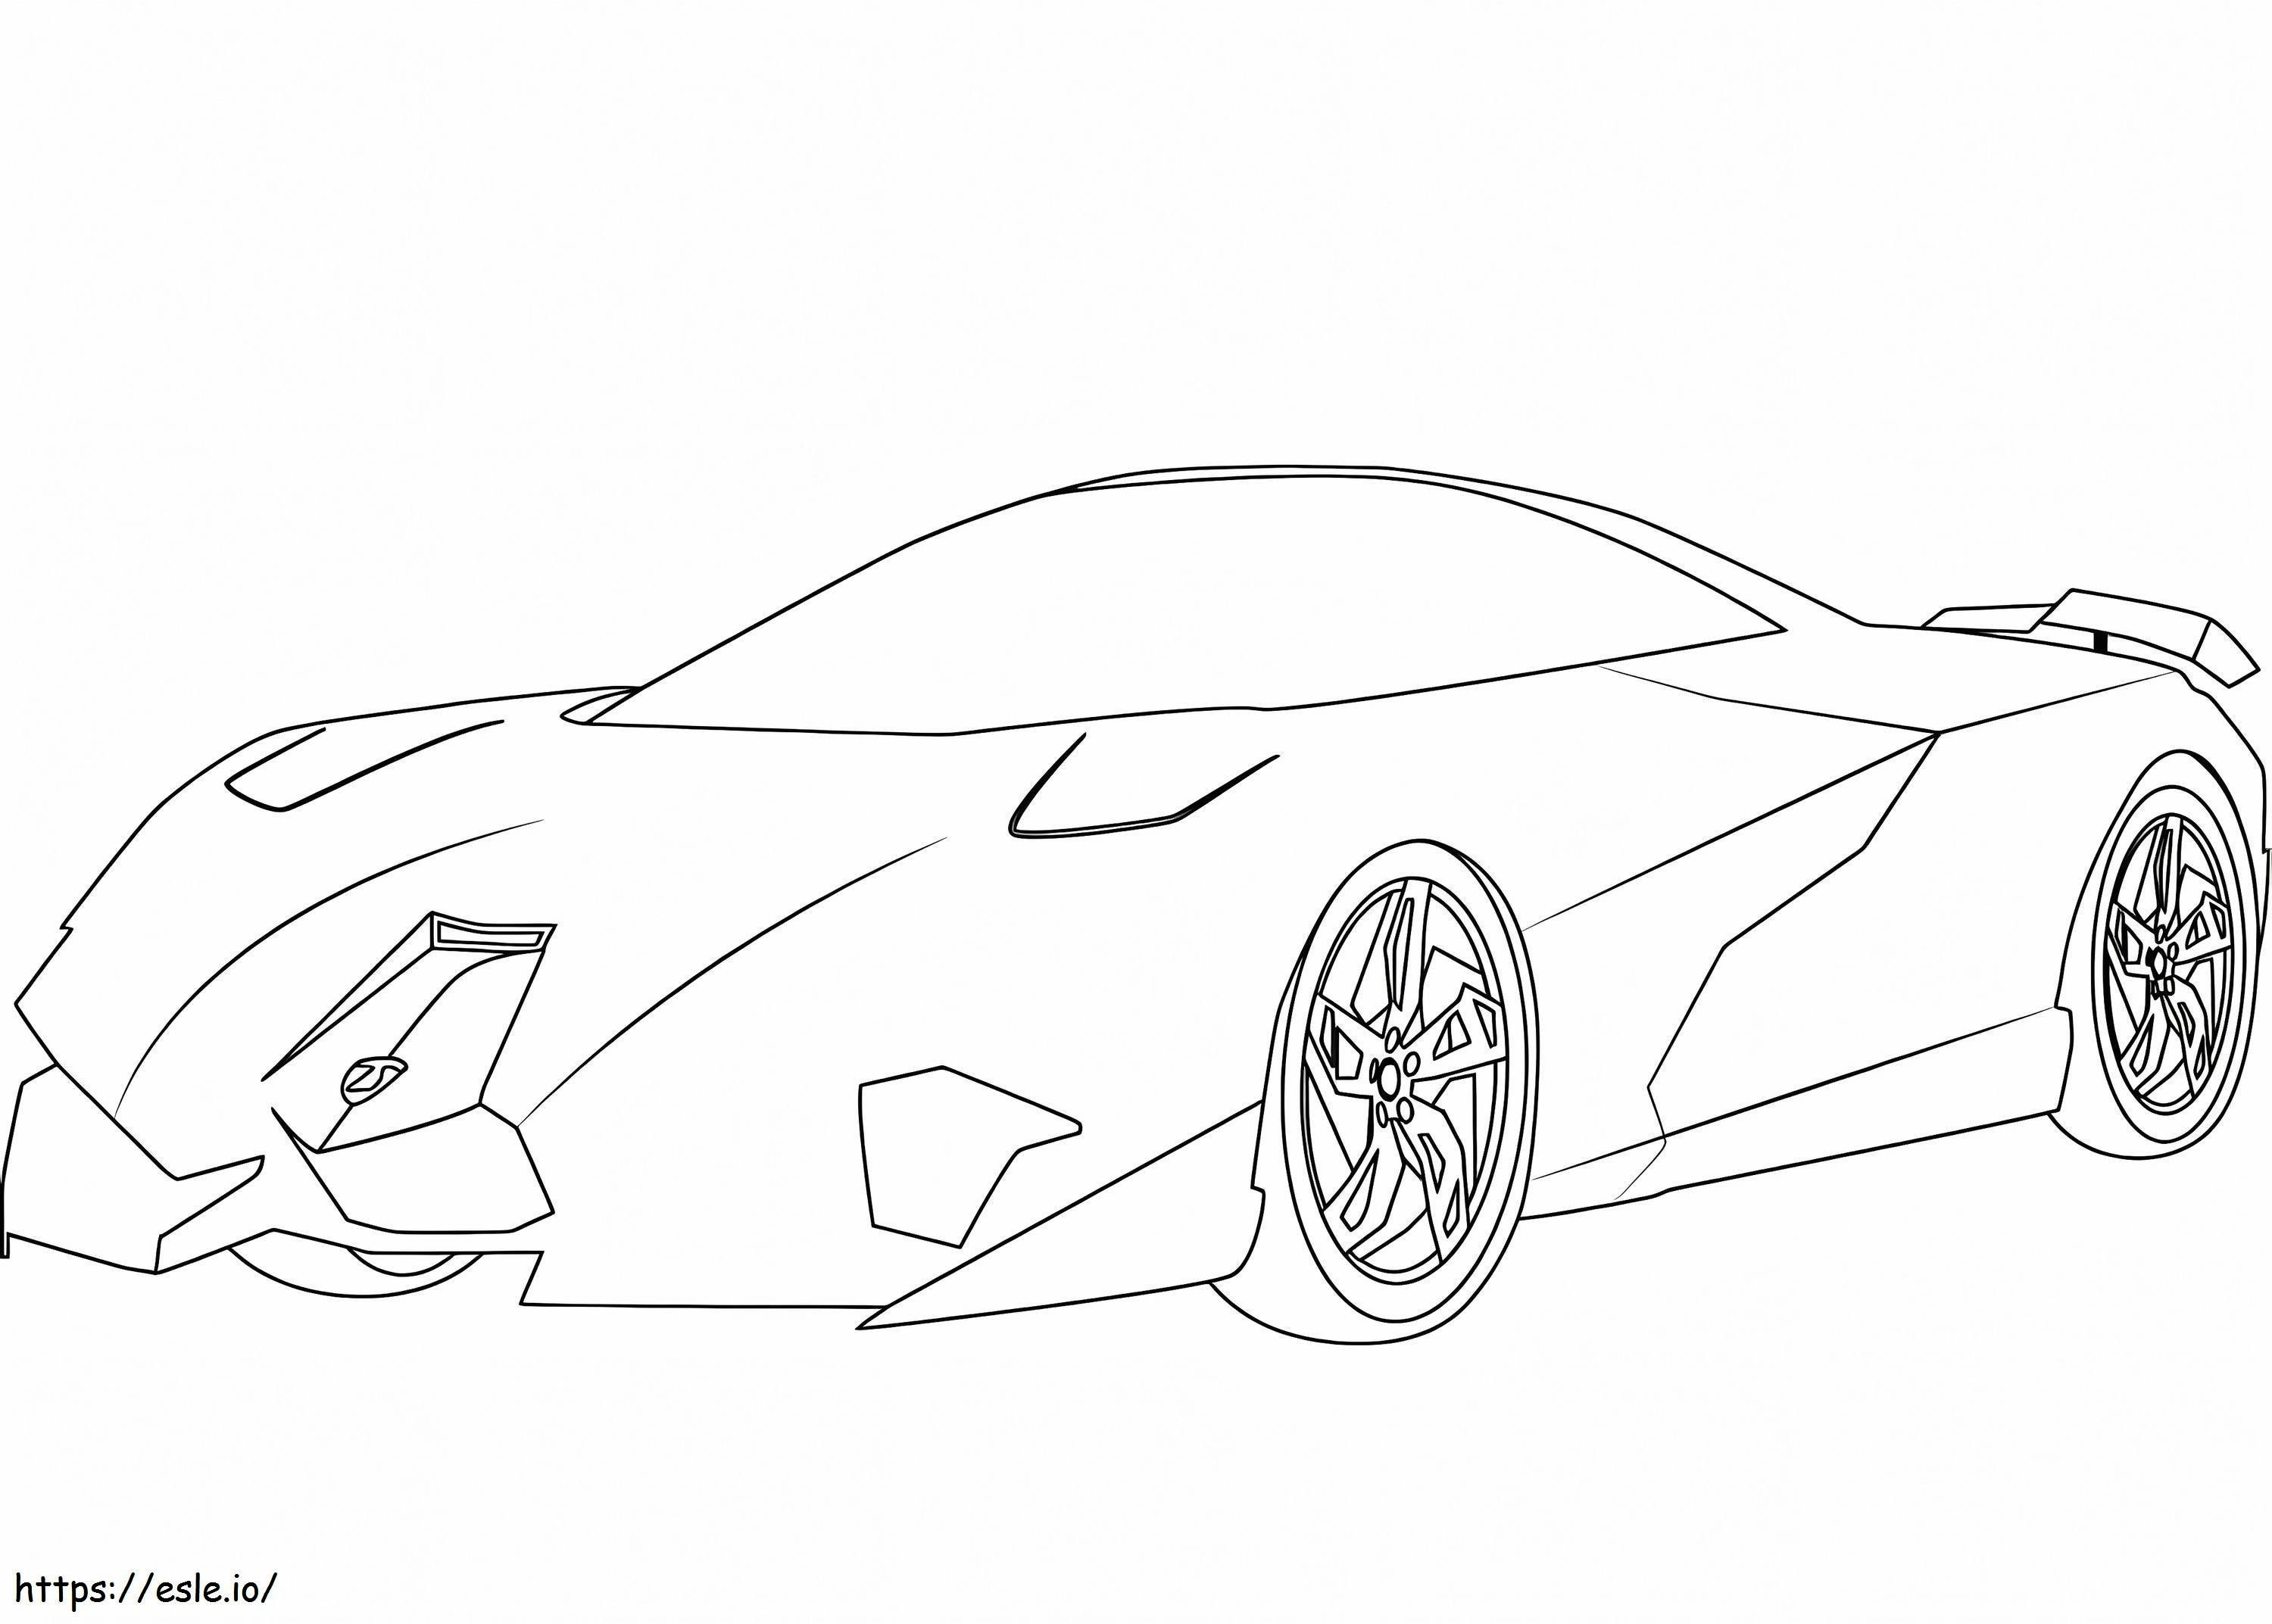 About The Lamborghini Ego coloring page